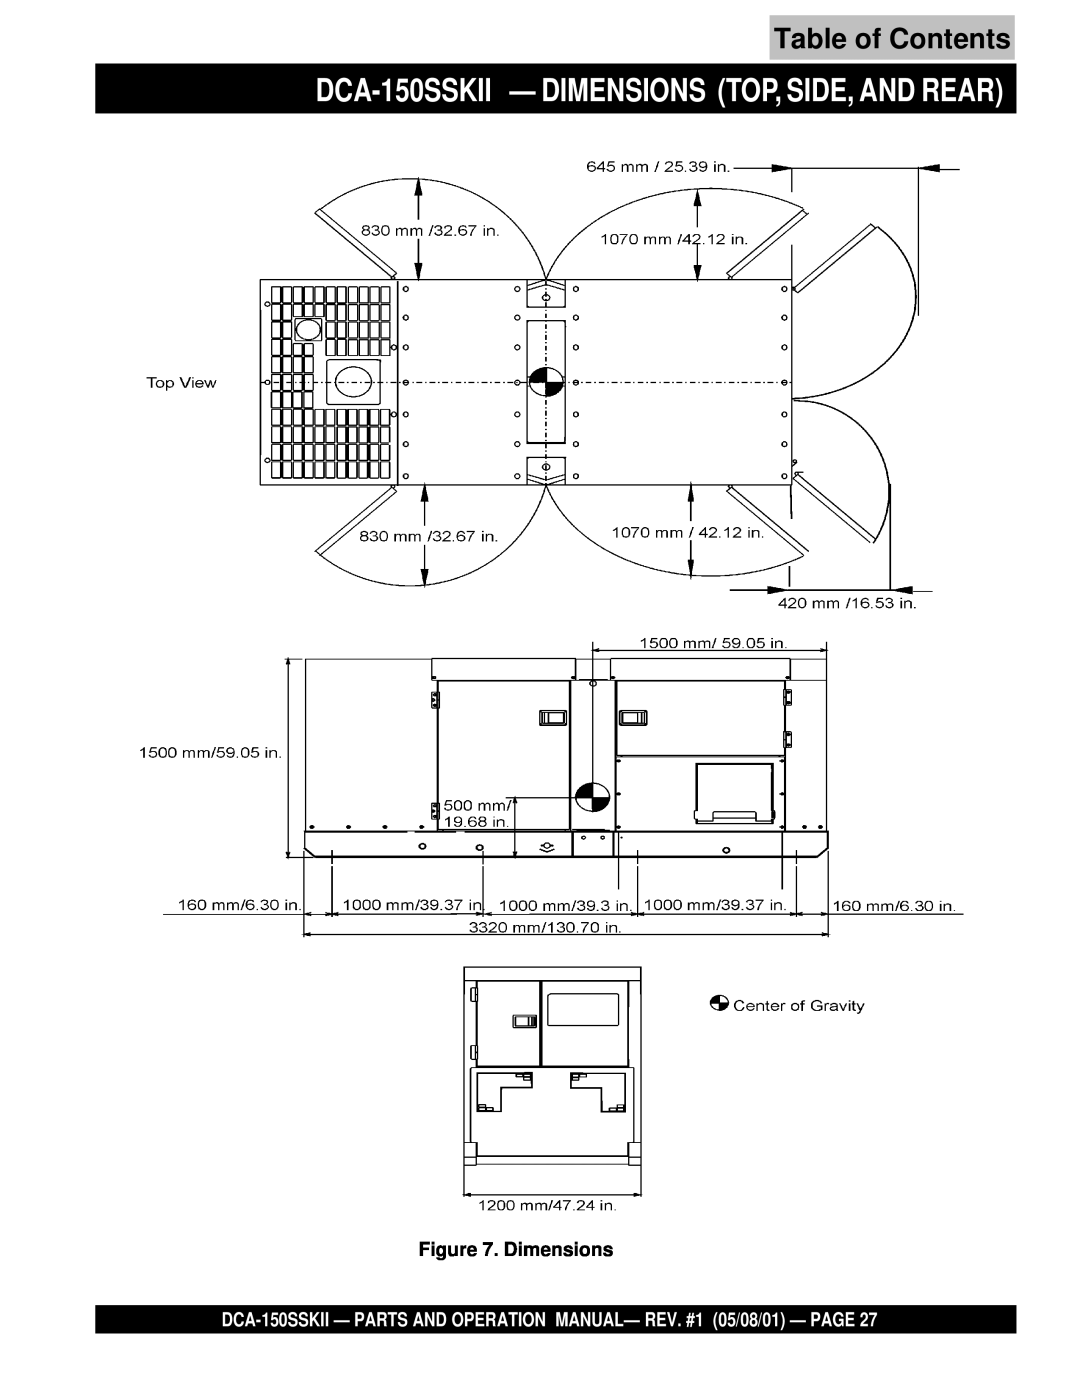 Multiquip operation manual DCA-150SSKII - DIMENSIONS TOP, SIDE, AND REAR, Table of Contents, Dimensions 